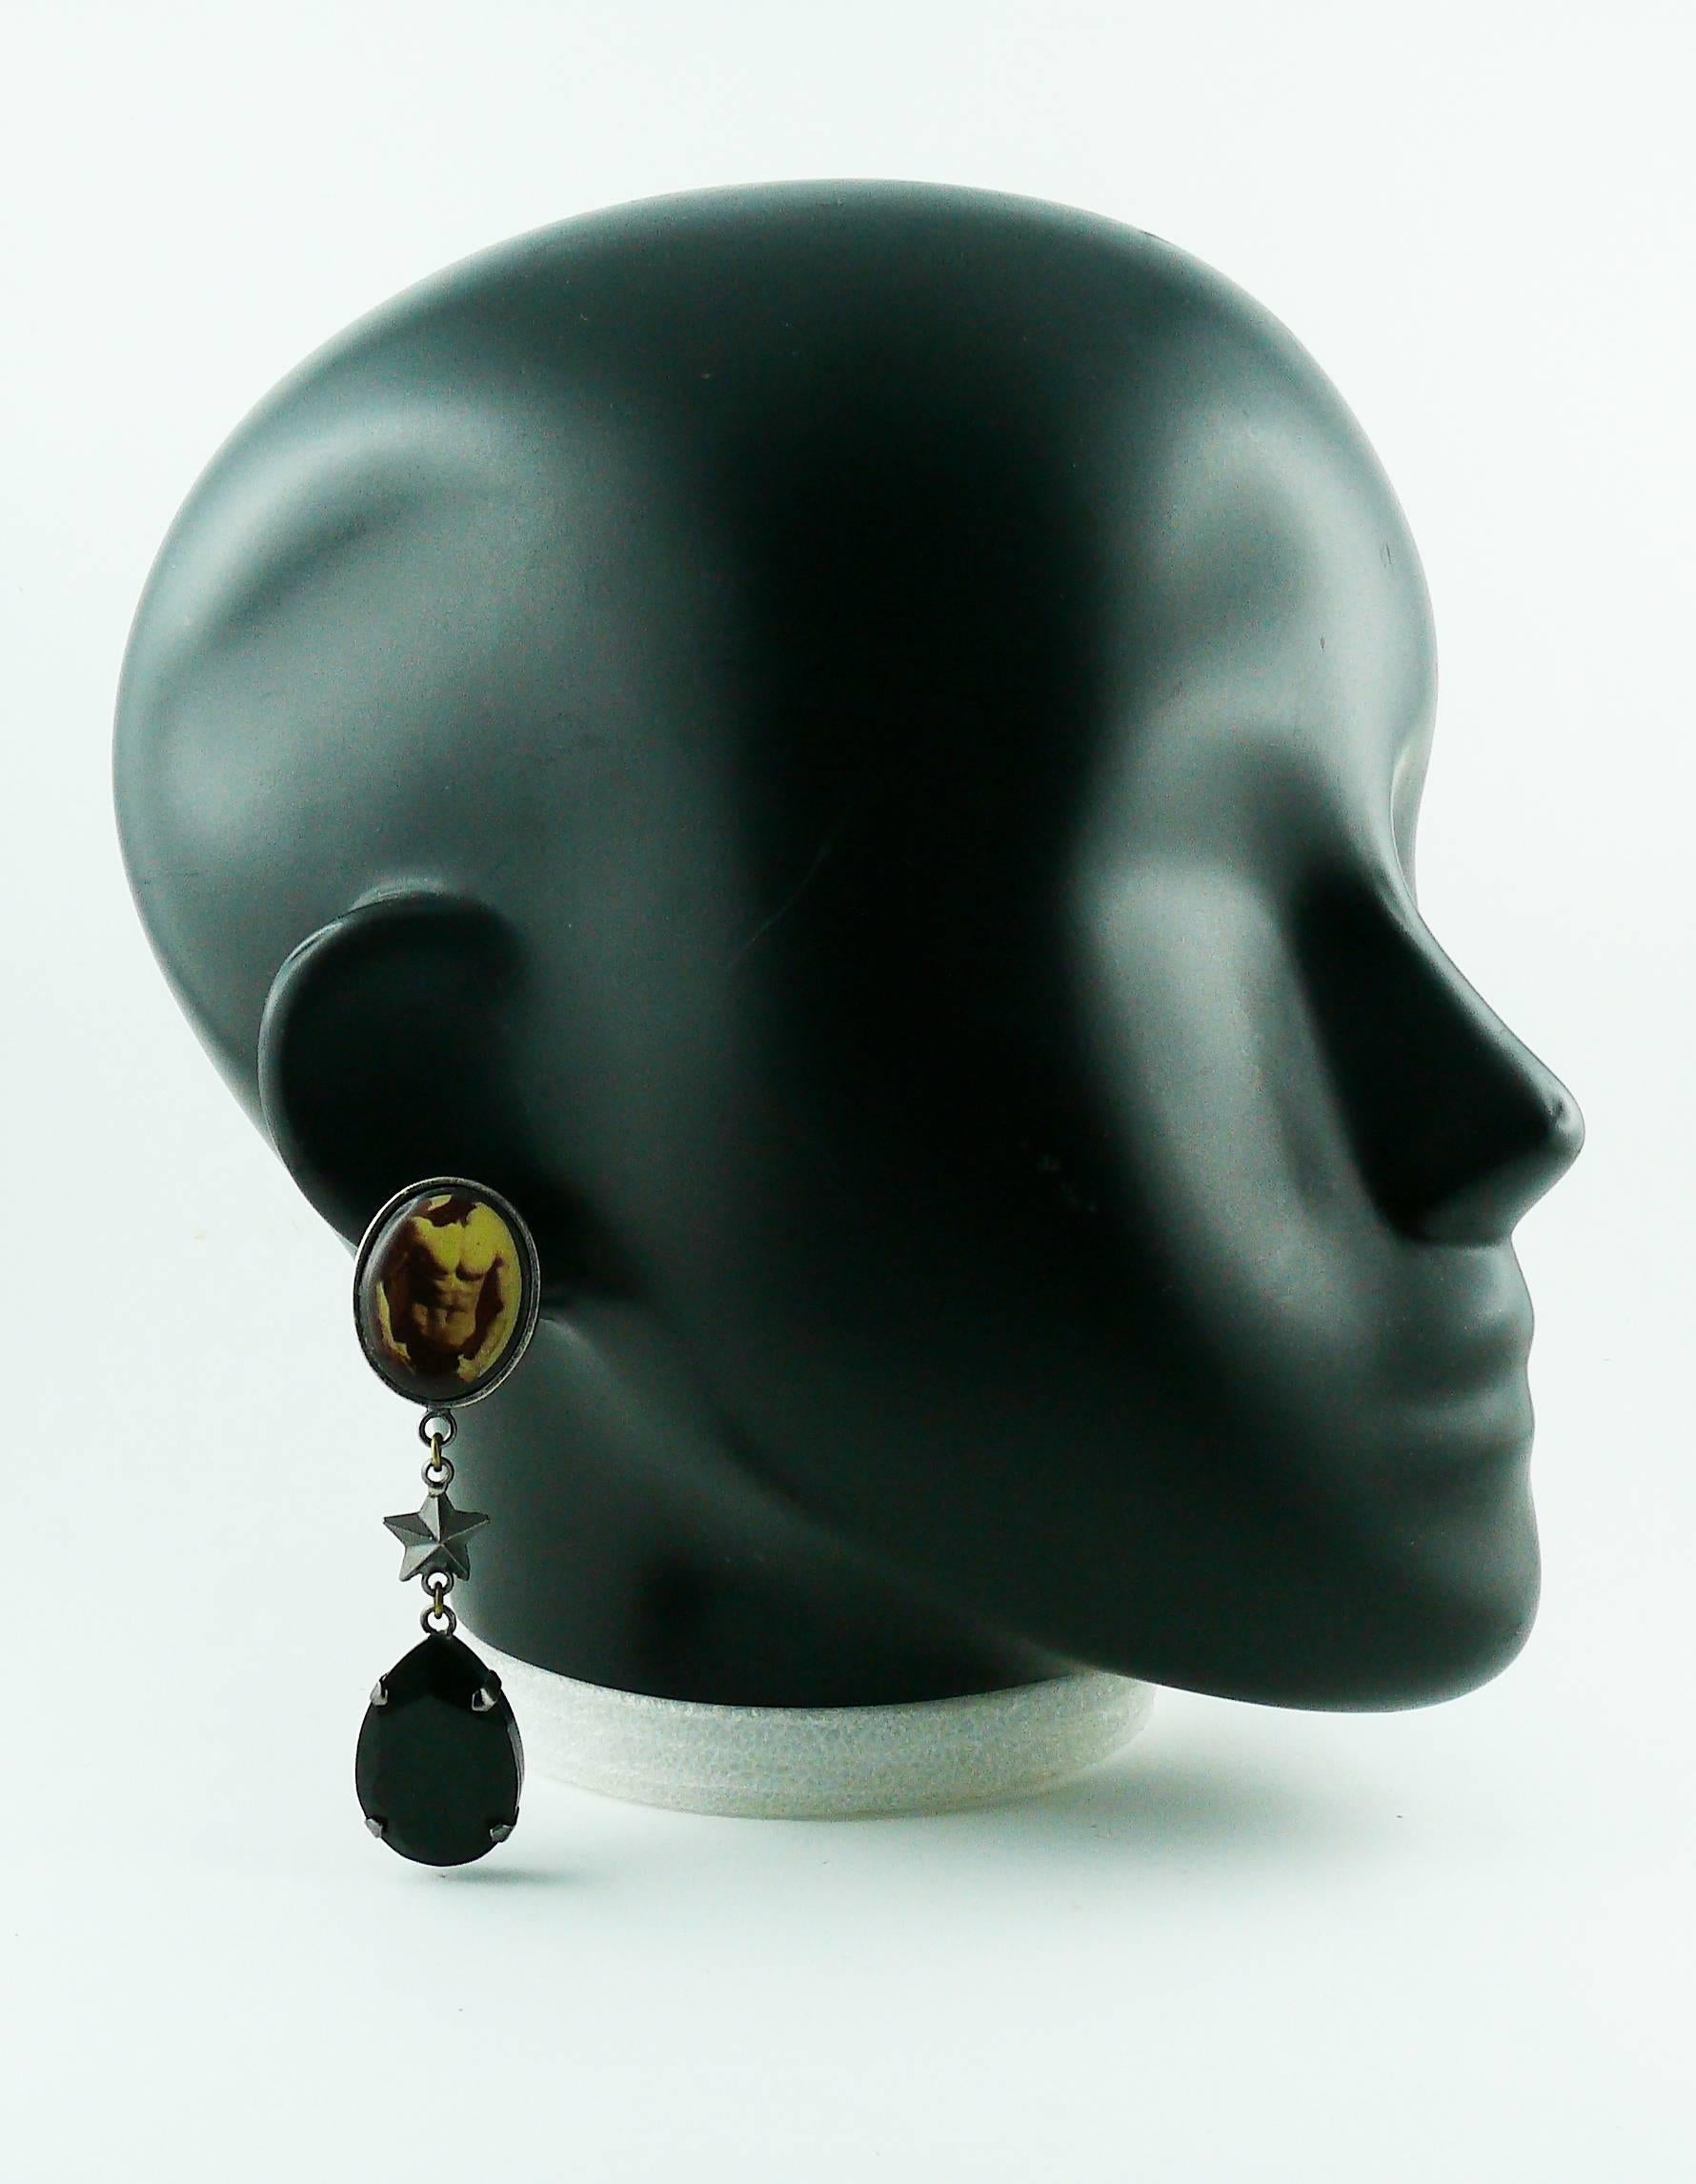 JEAN PAUL GAULTIER vintage novelty dangling earrings (clip-on) featuring a resin inlaid male torso print top and a large black crystal drop in a gun patina metal setting.

Marked JPG.

Indicative measurements : length approx. 8.4 cm (3.31 inches) /